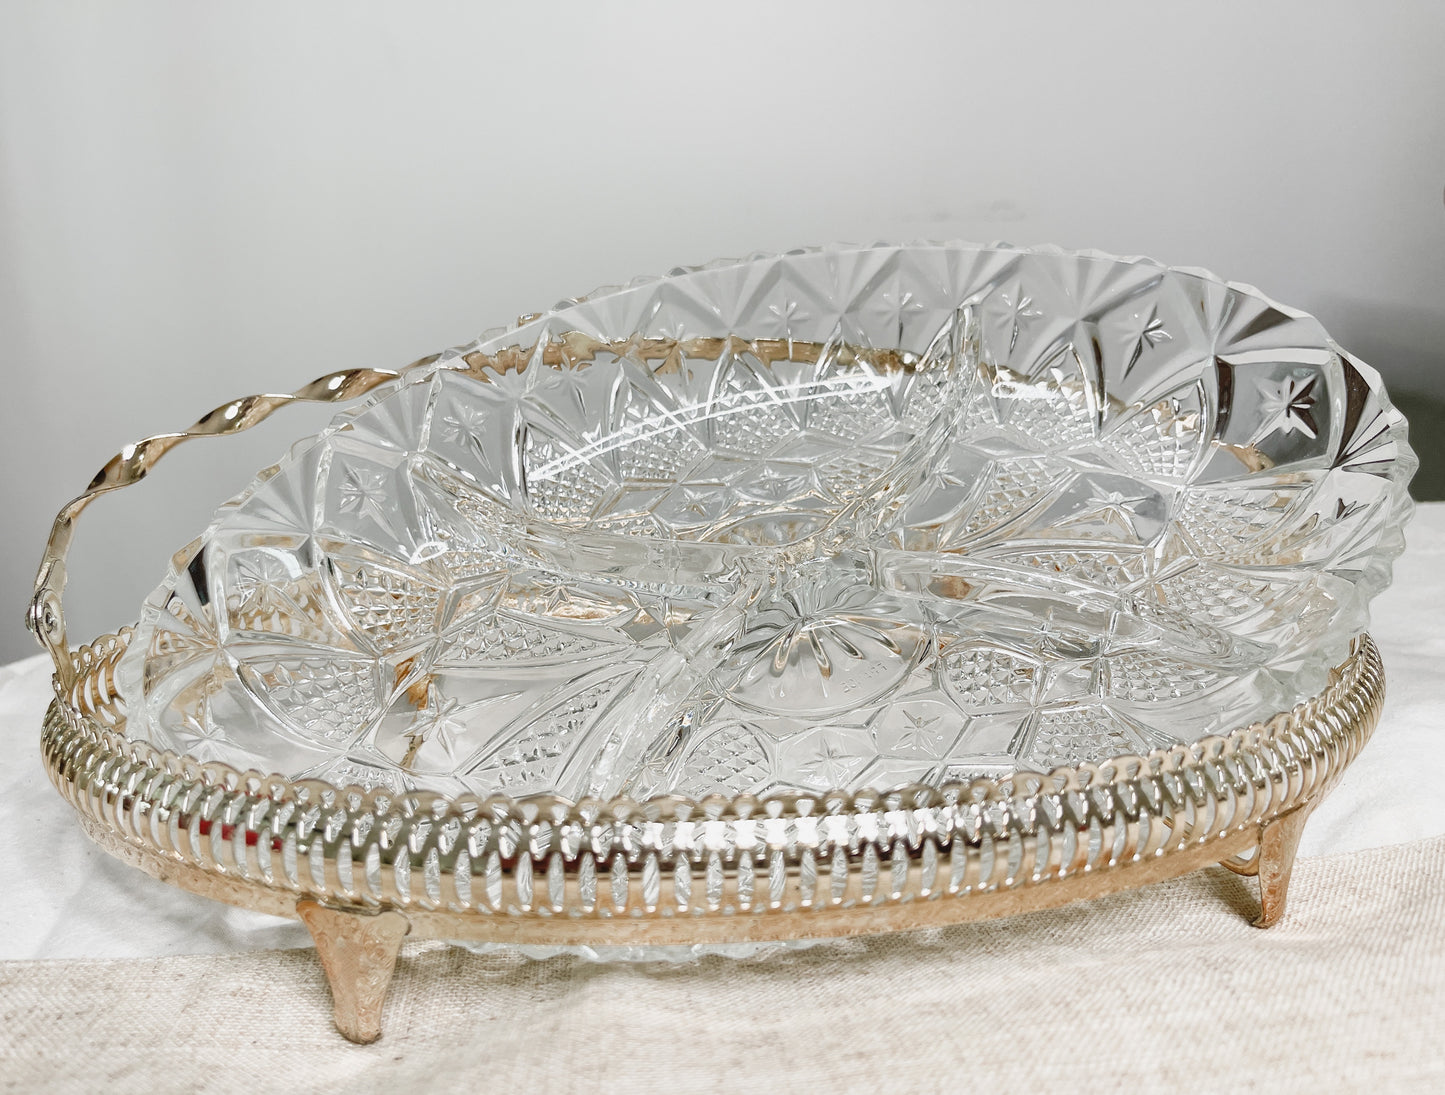 Crystal serving dish with metal holder